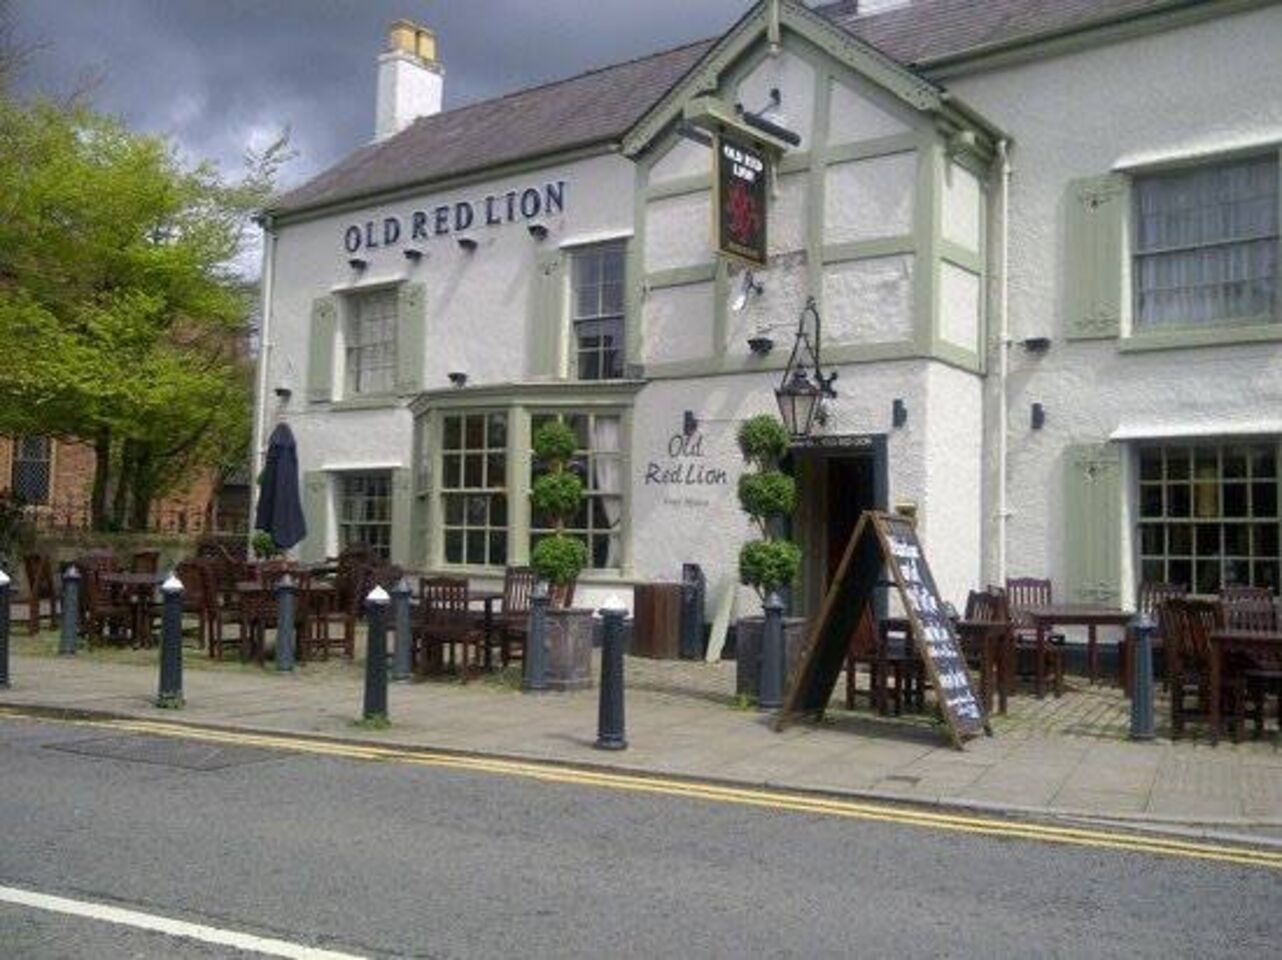 A photo of The Old Red Lion